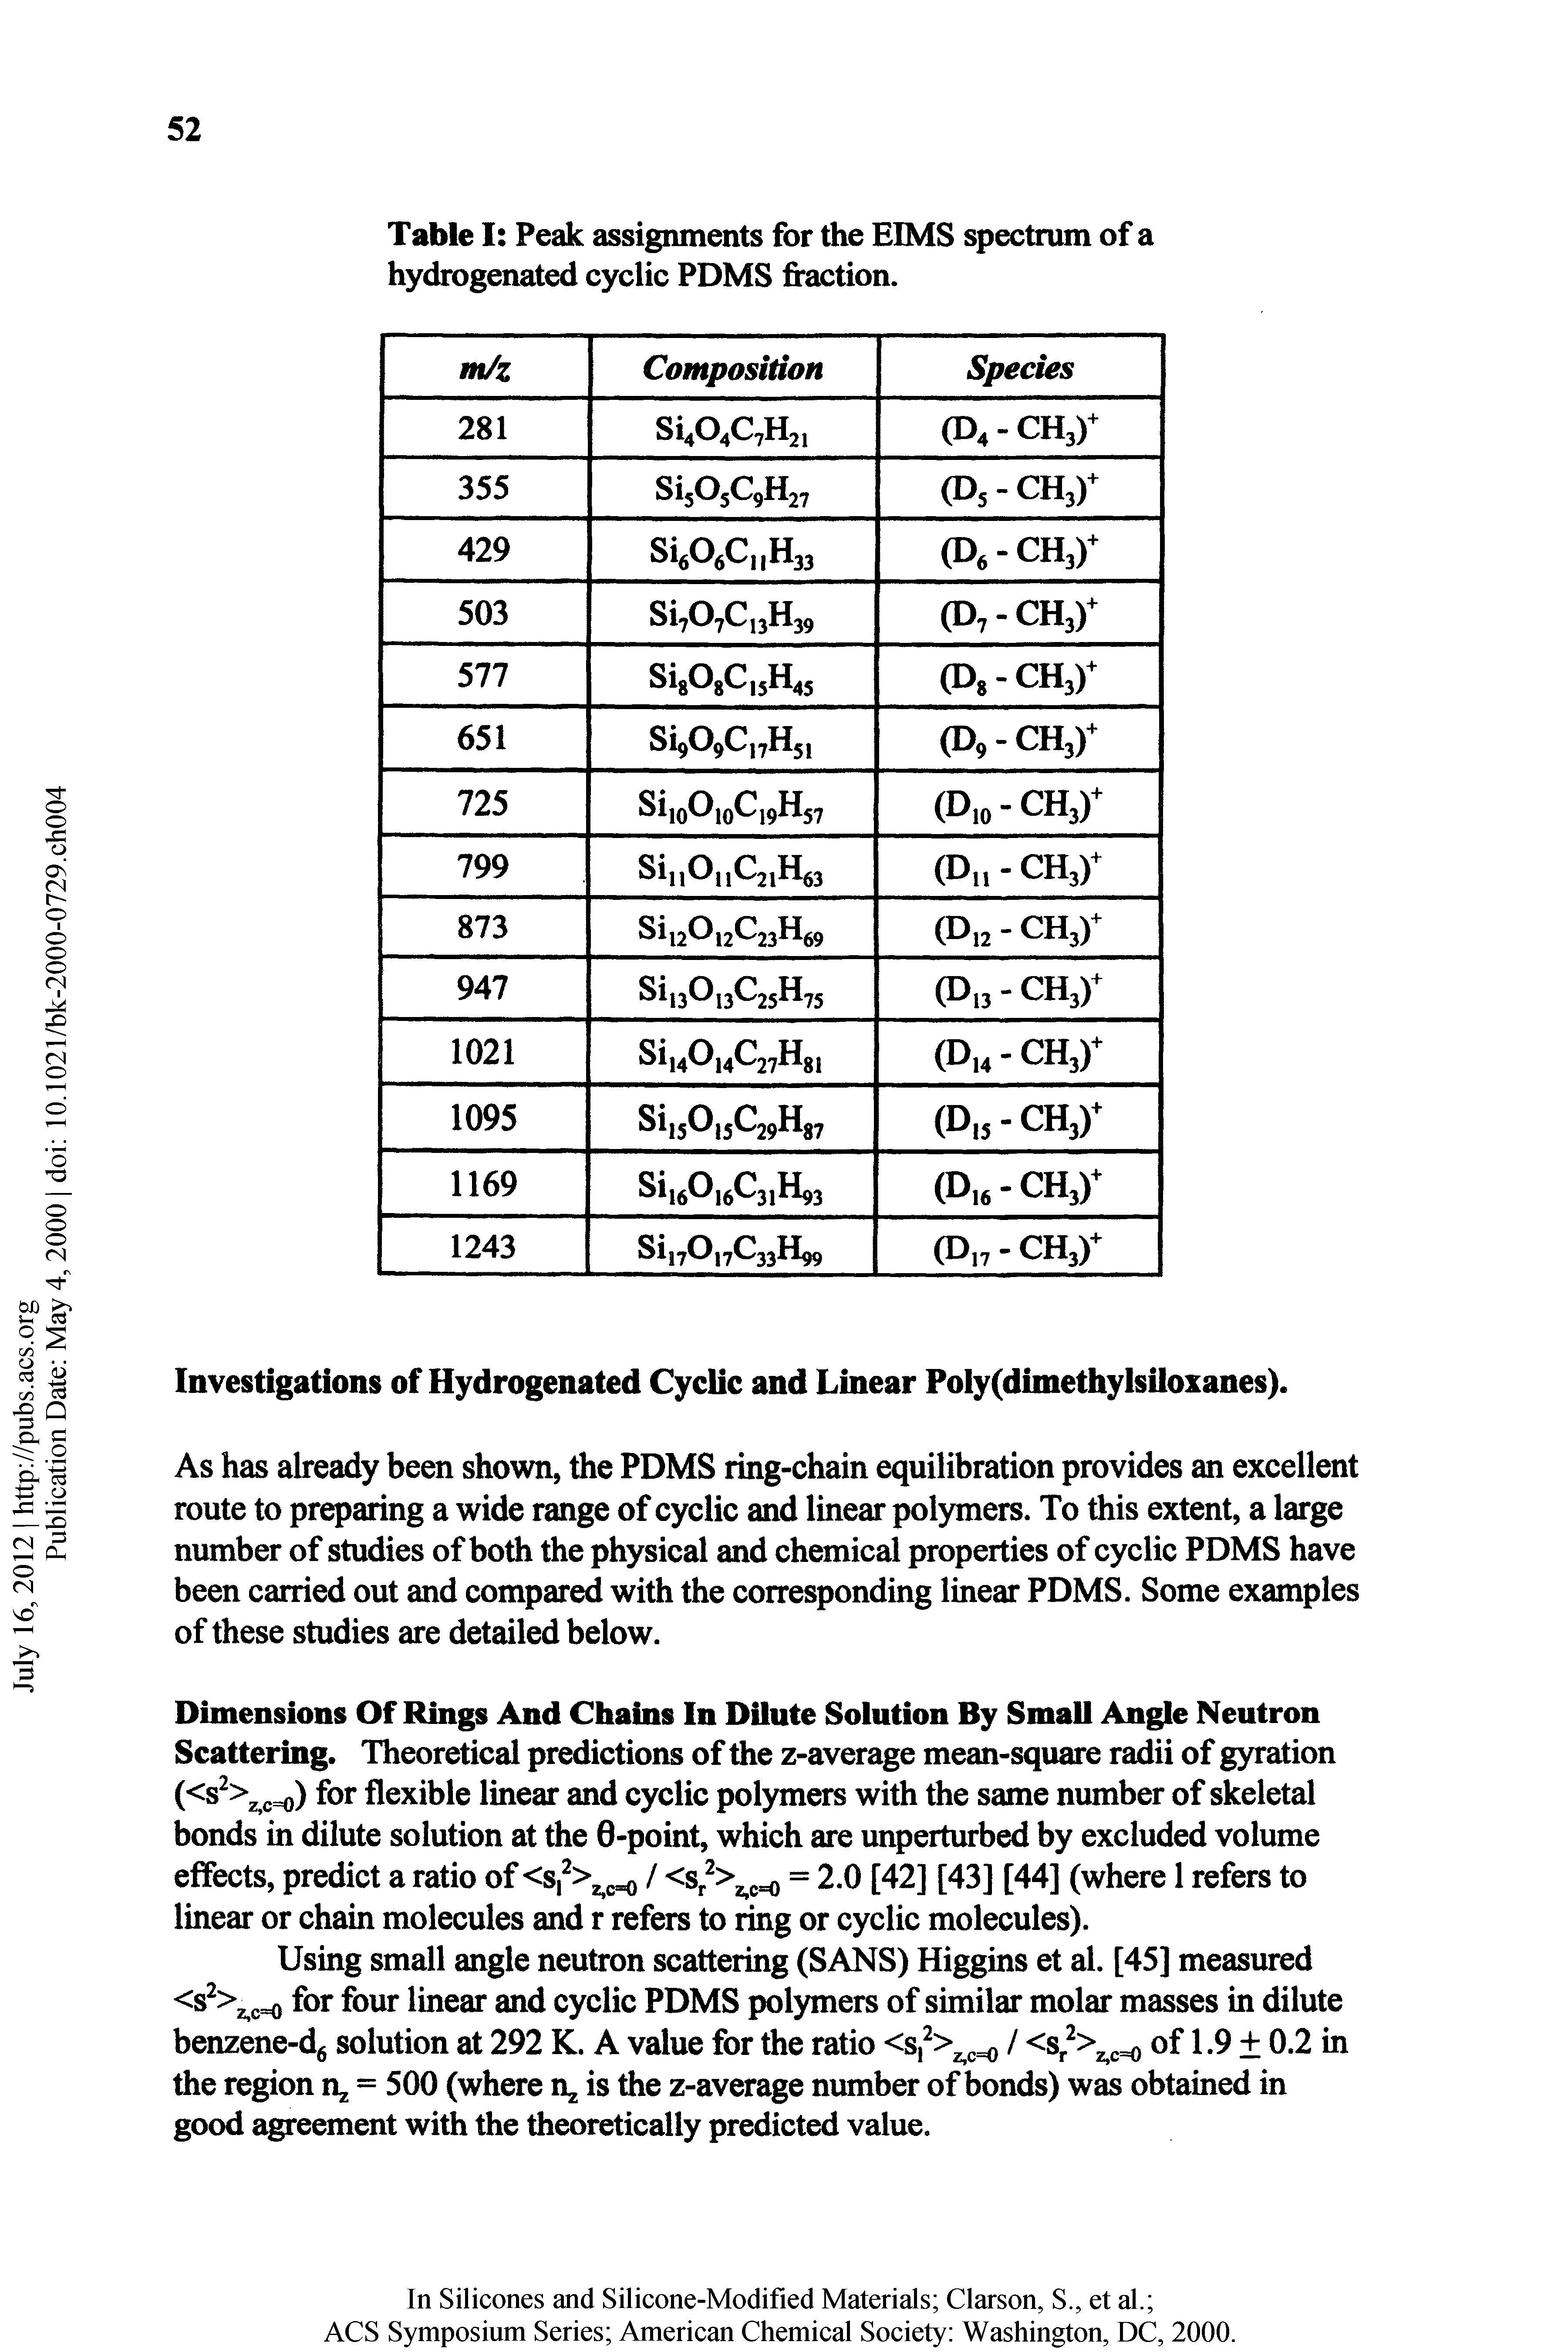 Table I Peak assignments for the EIMS spectrum of a hydrogenated cyclic PDMS fraction. ...